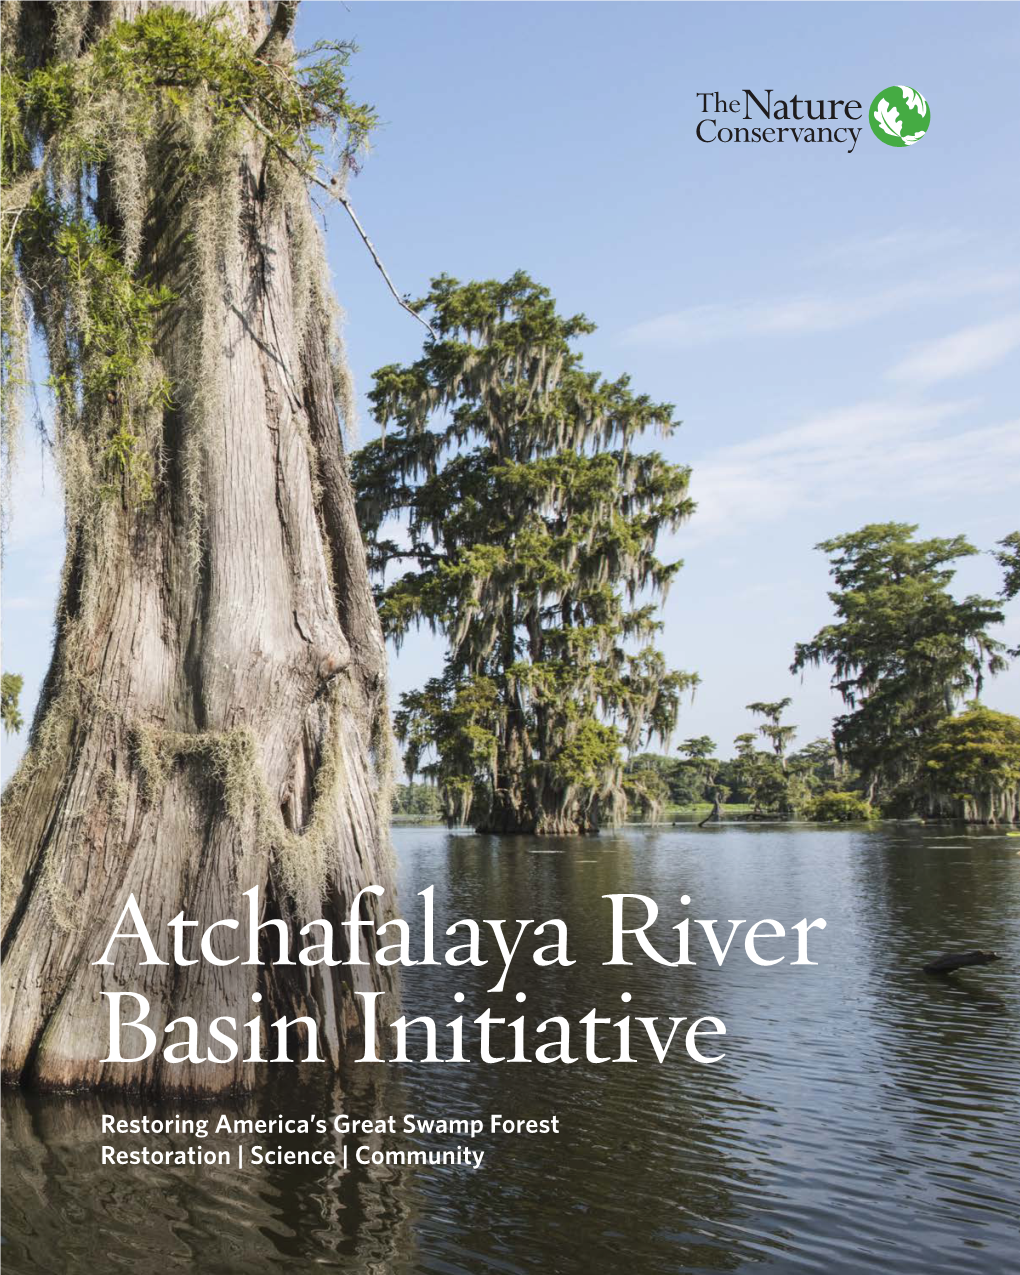 Atchafalaya River Basin Initiative Restoring America’S Great Swamp Forest Restoration | Science | Community the Place the Atchafalaya River Basin Teems with Life